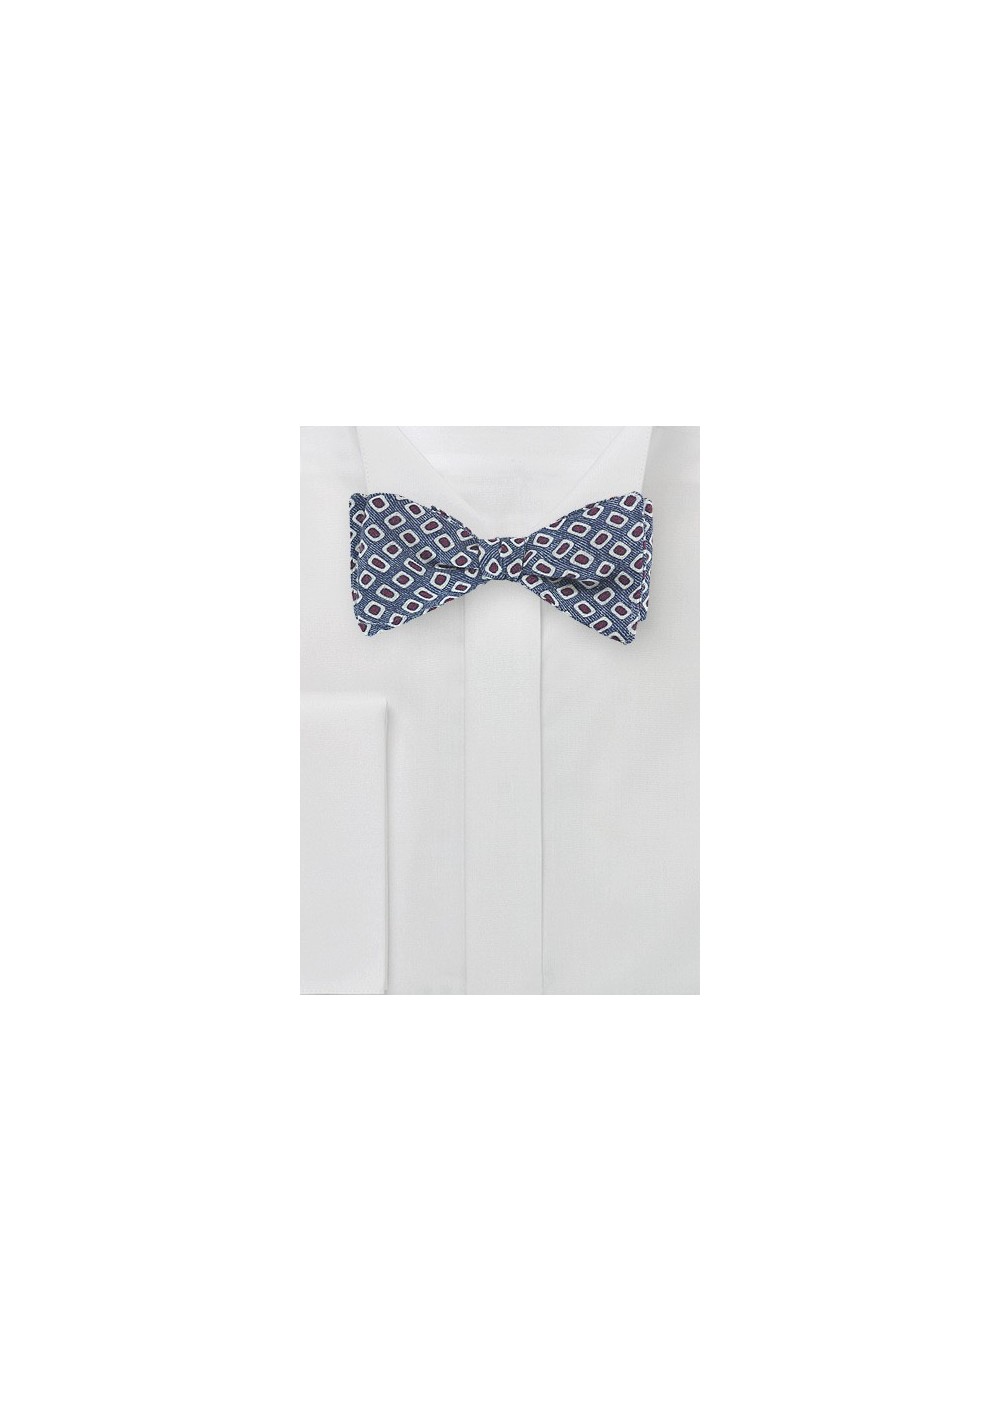 Vintage Print Wool Bow Tie in Indigo, White, and Red